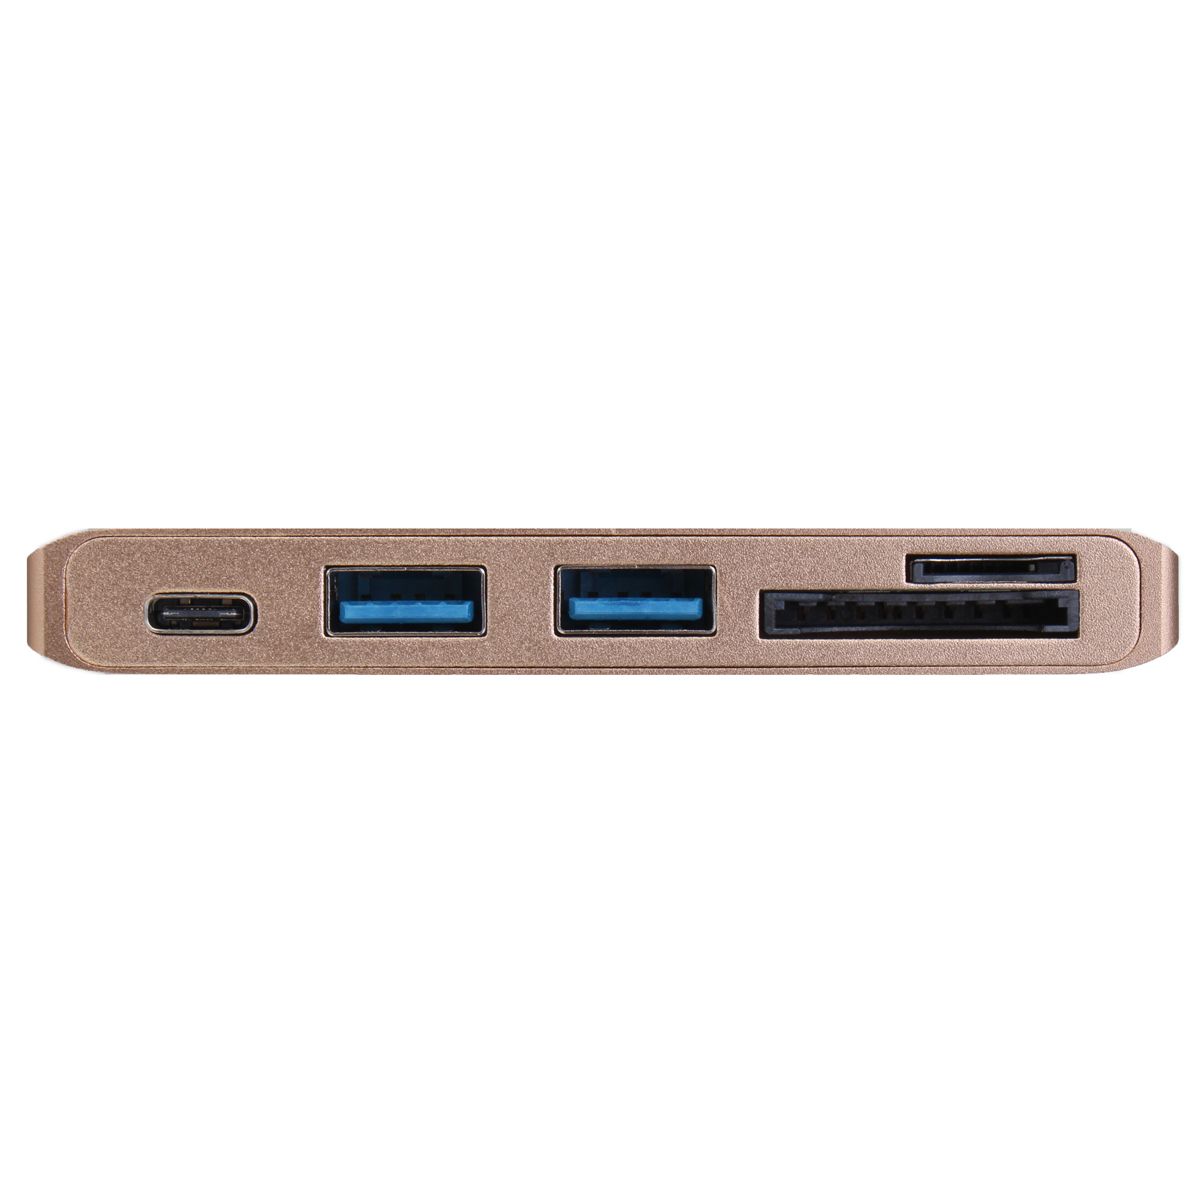 Multifunction-USB-Hub-Type-C-to-Type-C-USB-30-2Ports-TF-SD-Card-Reader-for-Laptop-PC-1153671